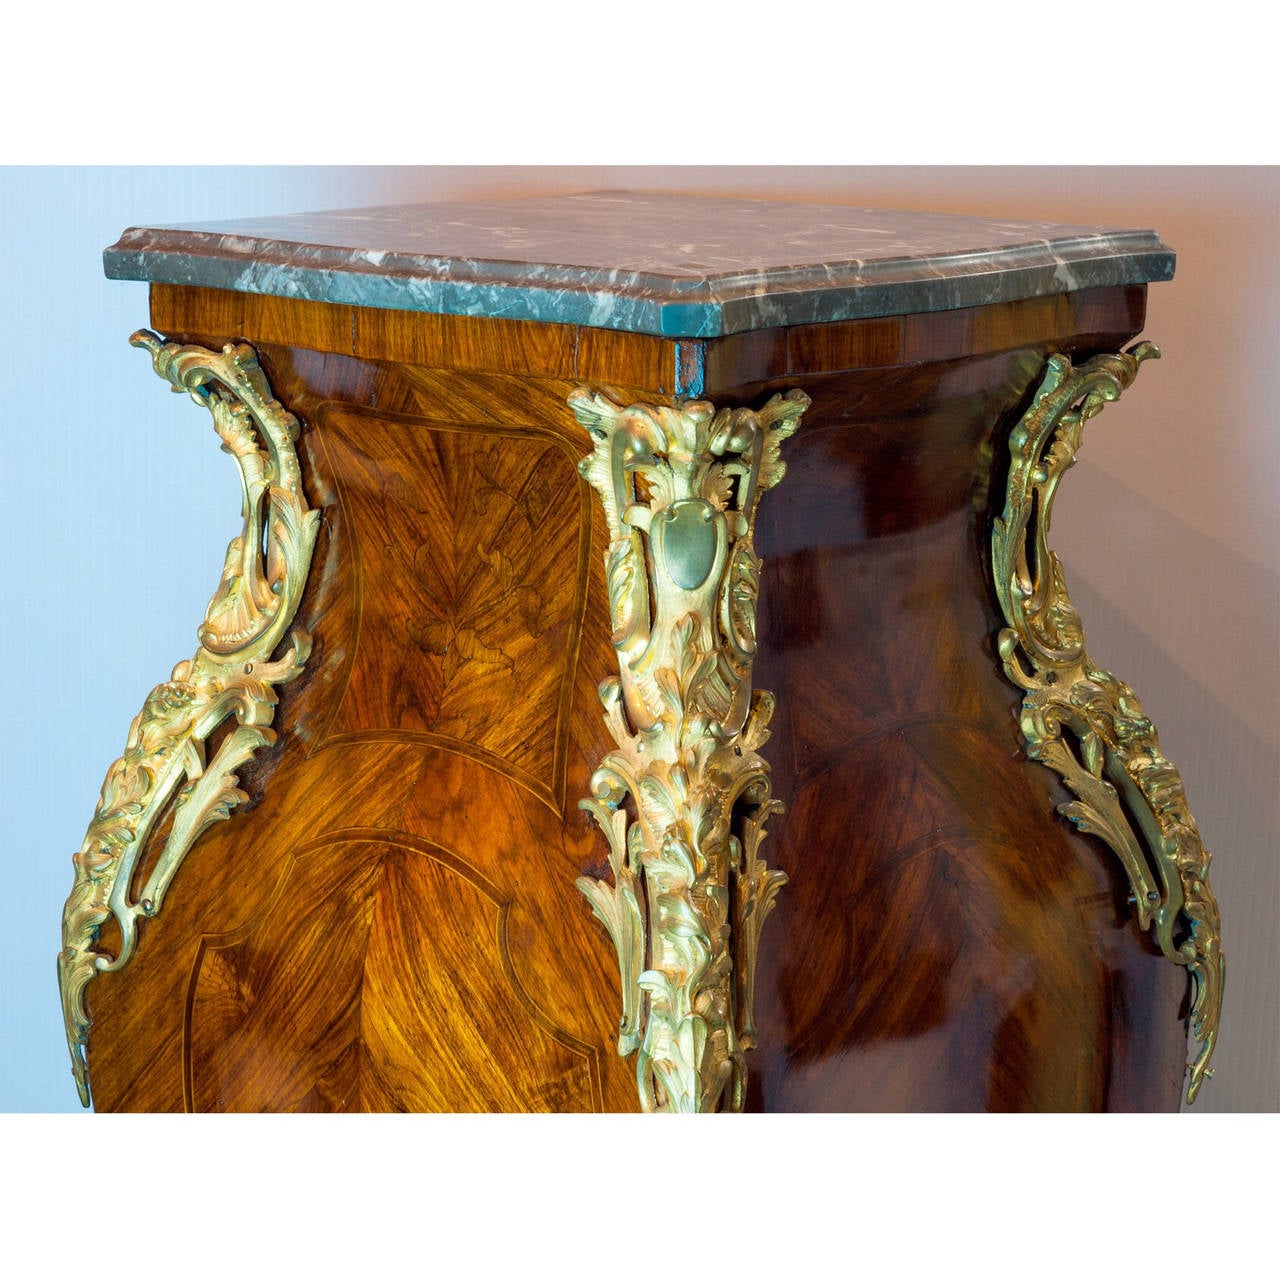 A Louis XV style bronze mounted square form pedestal with parquetry and marquetry inlaid design.